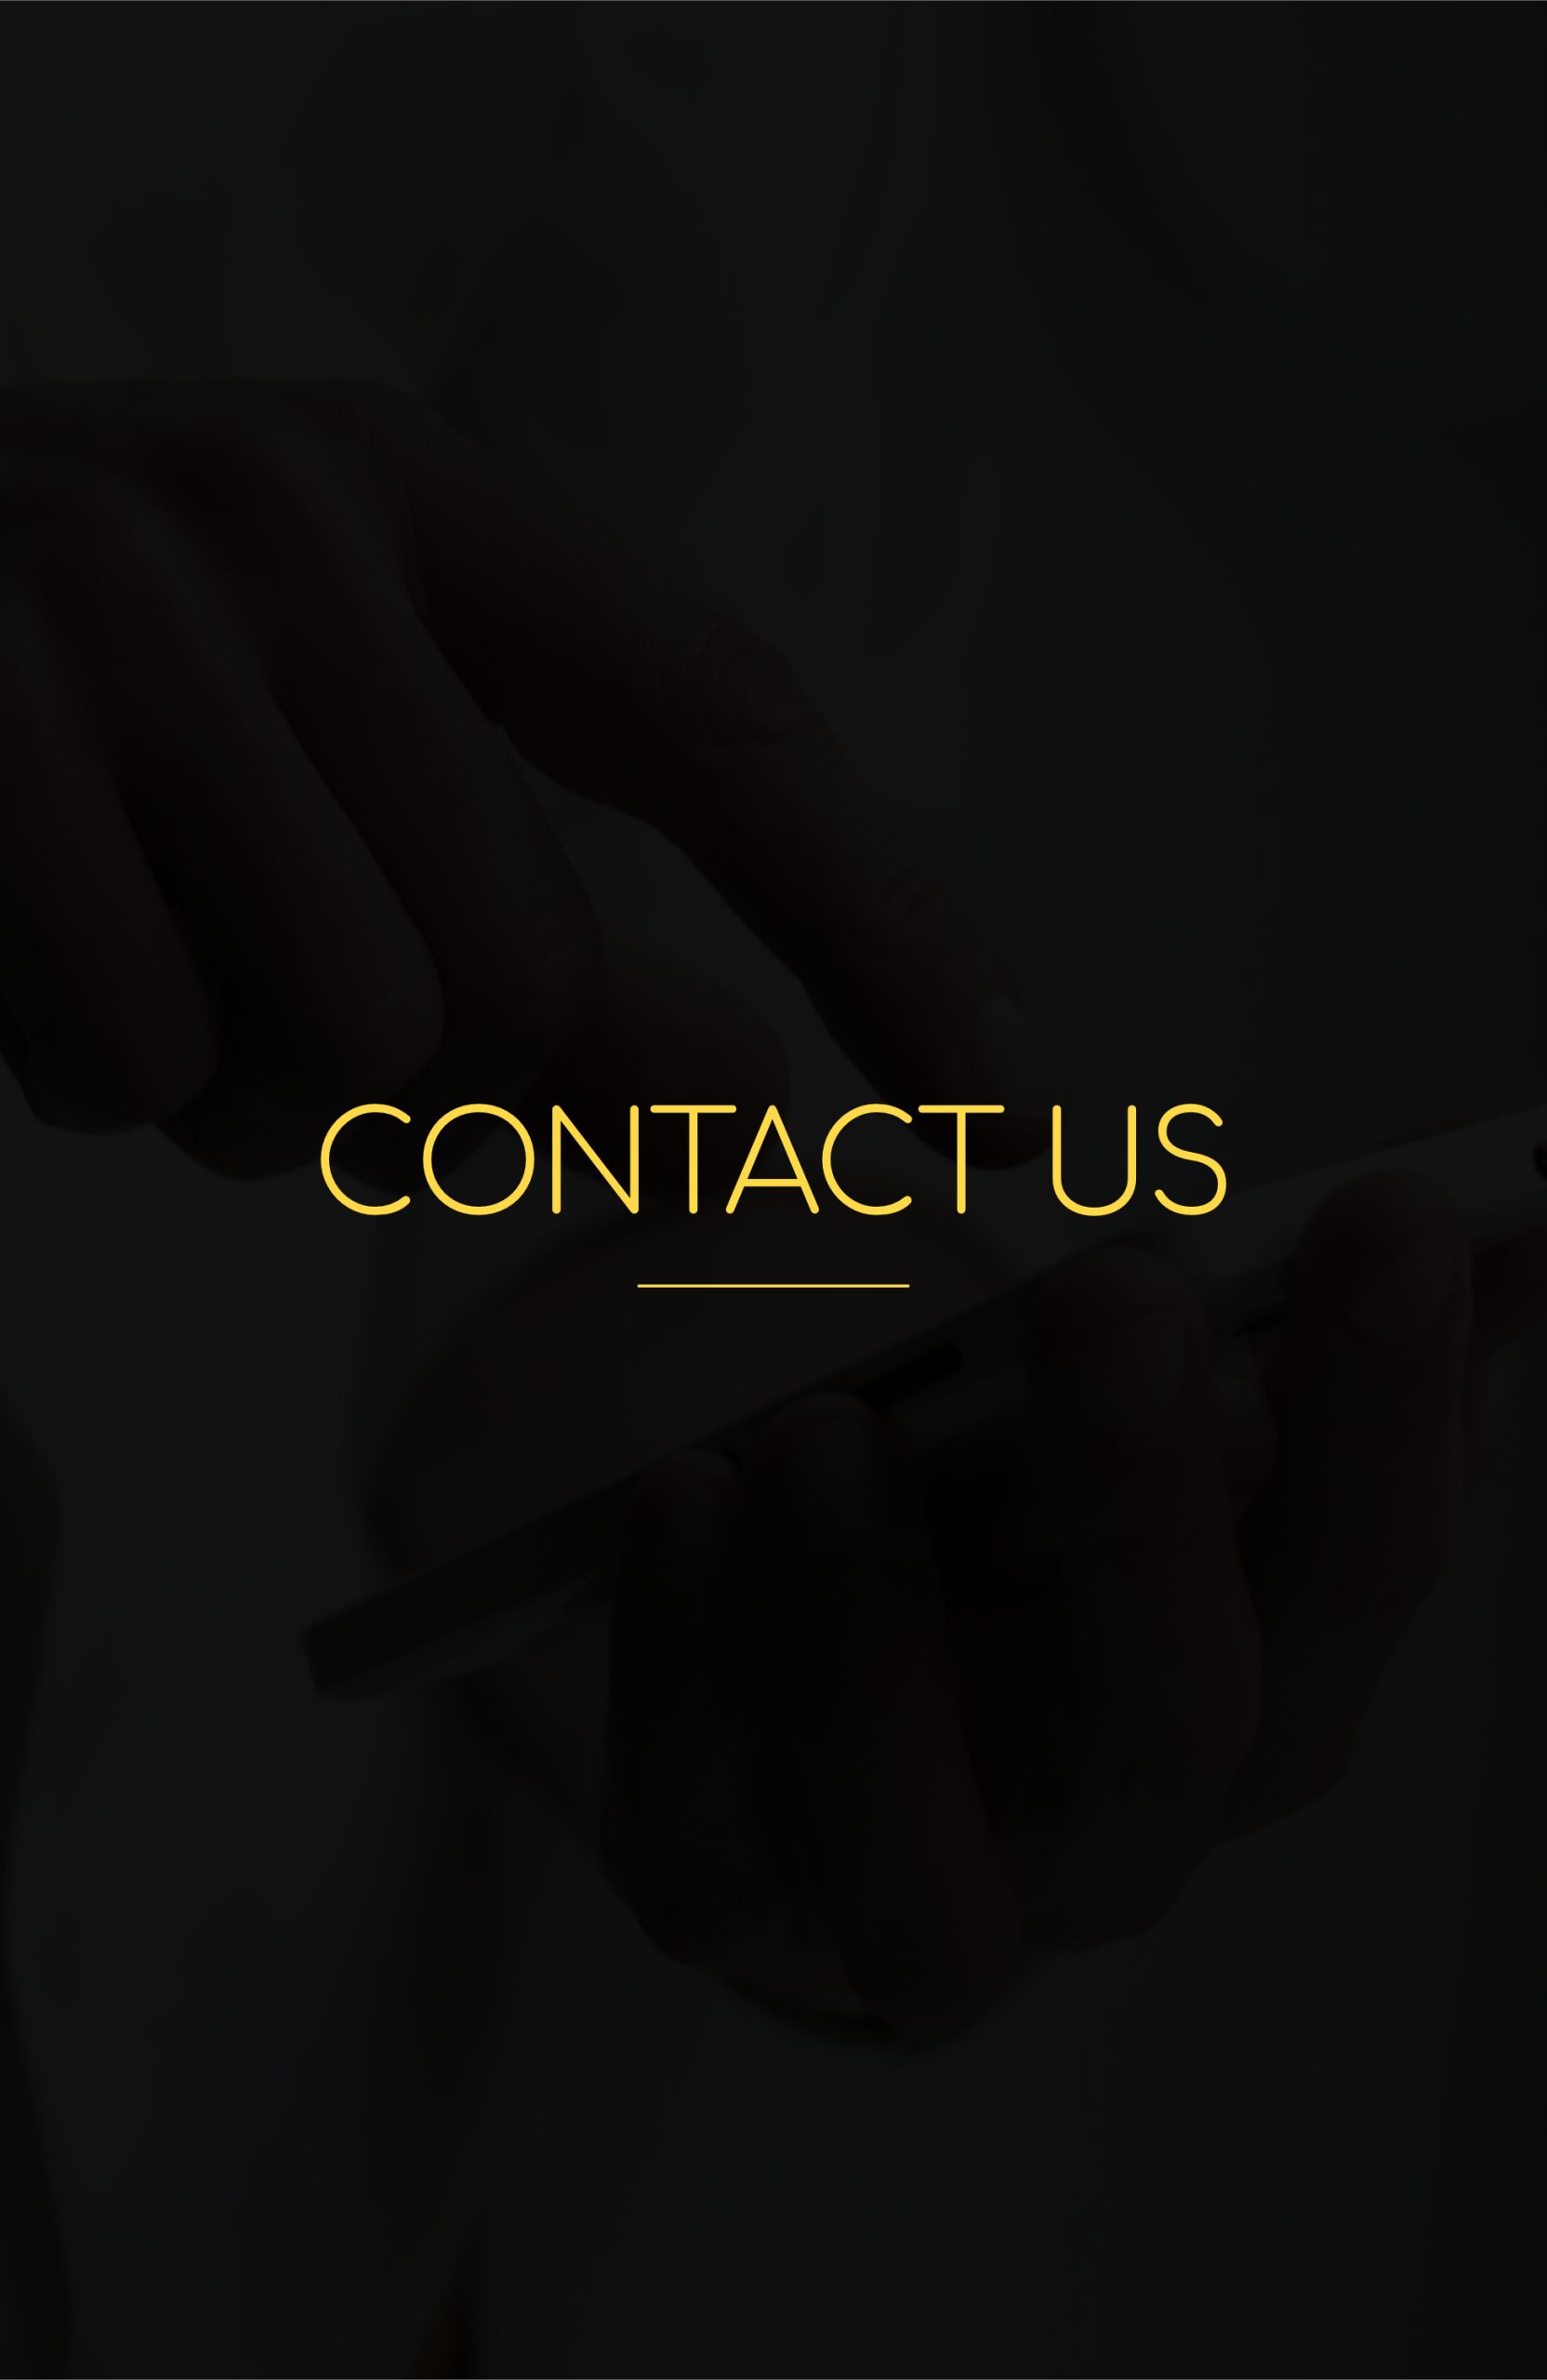 Contact Us Mobile